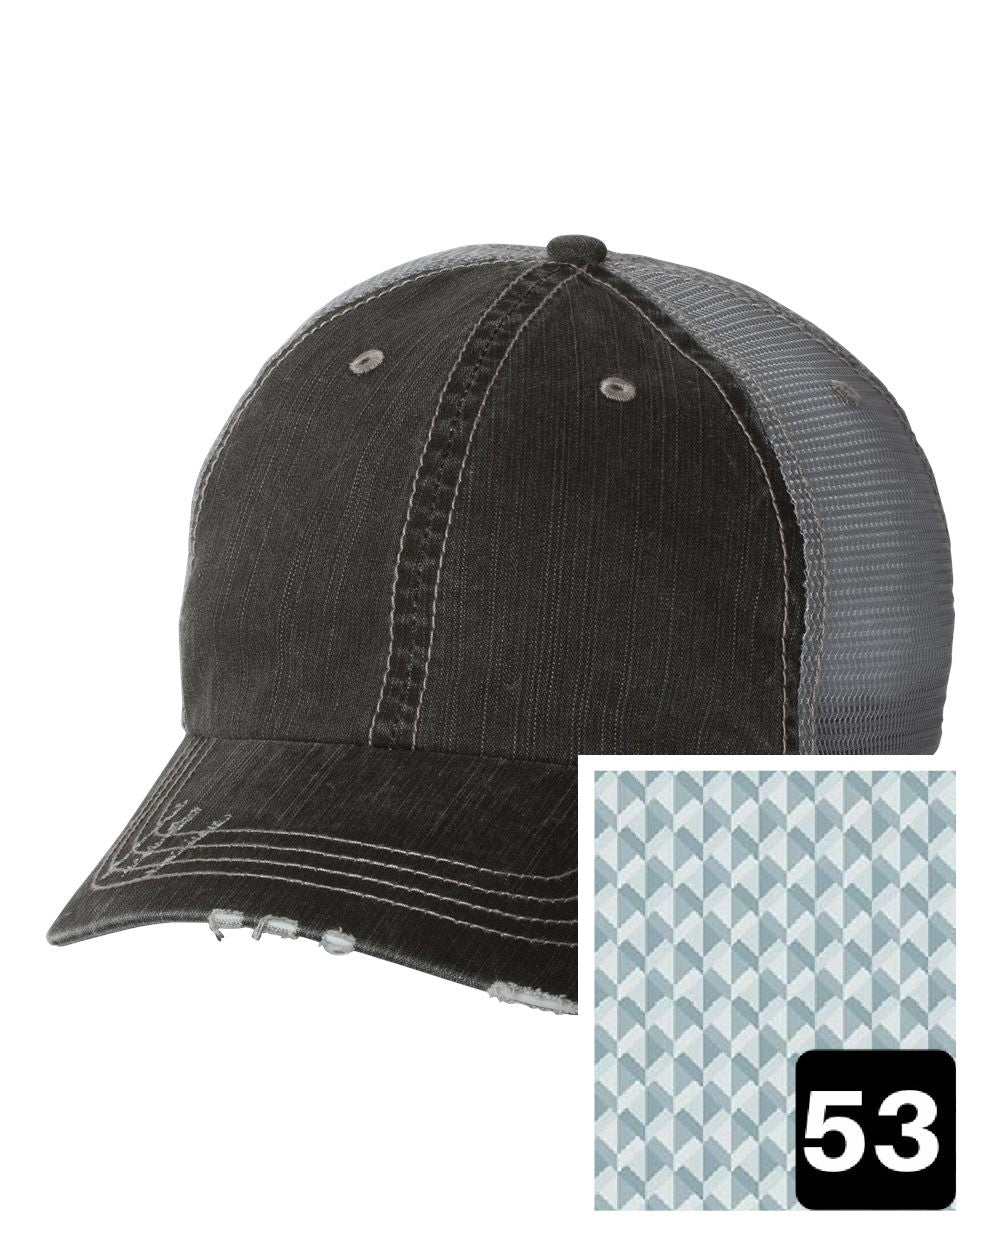 gray distressed trucker hat with multi-color stripe fabric state of Washington